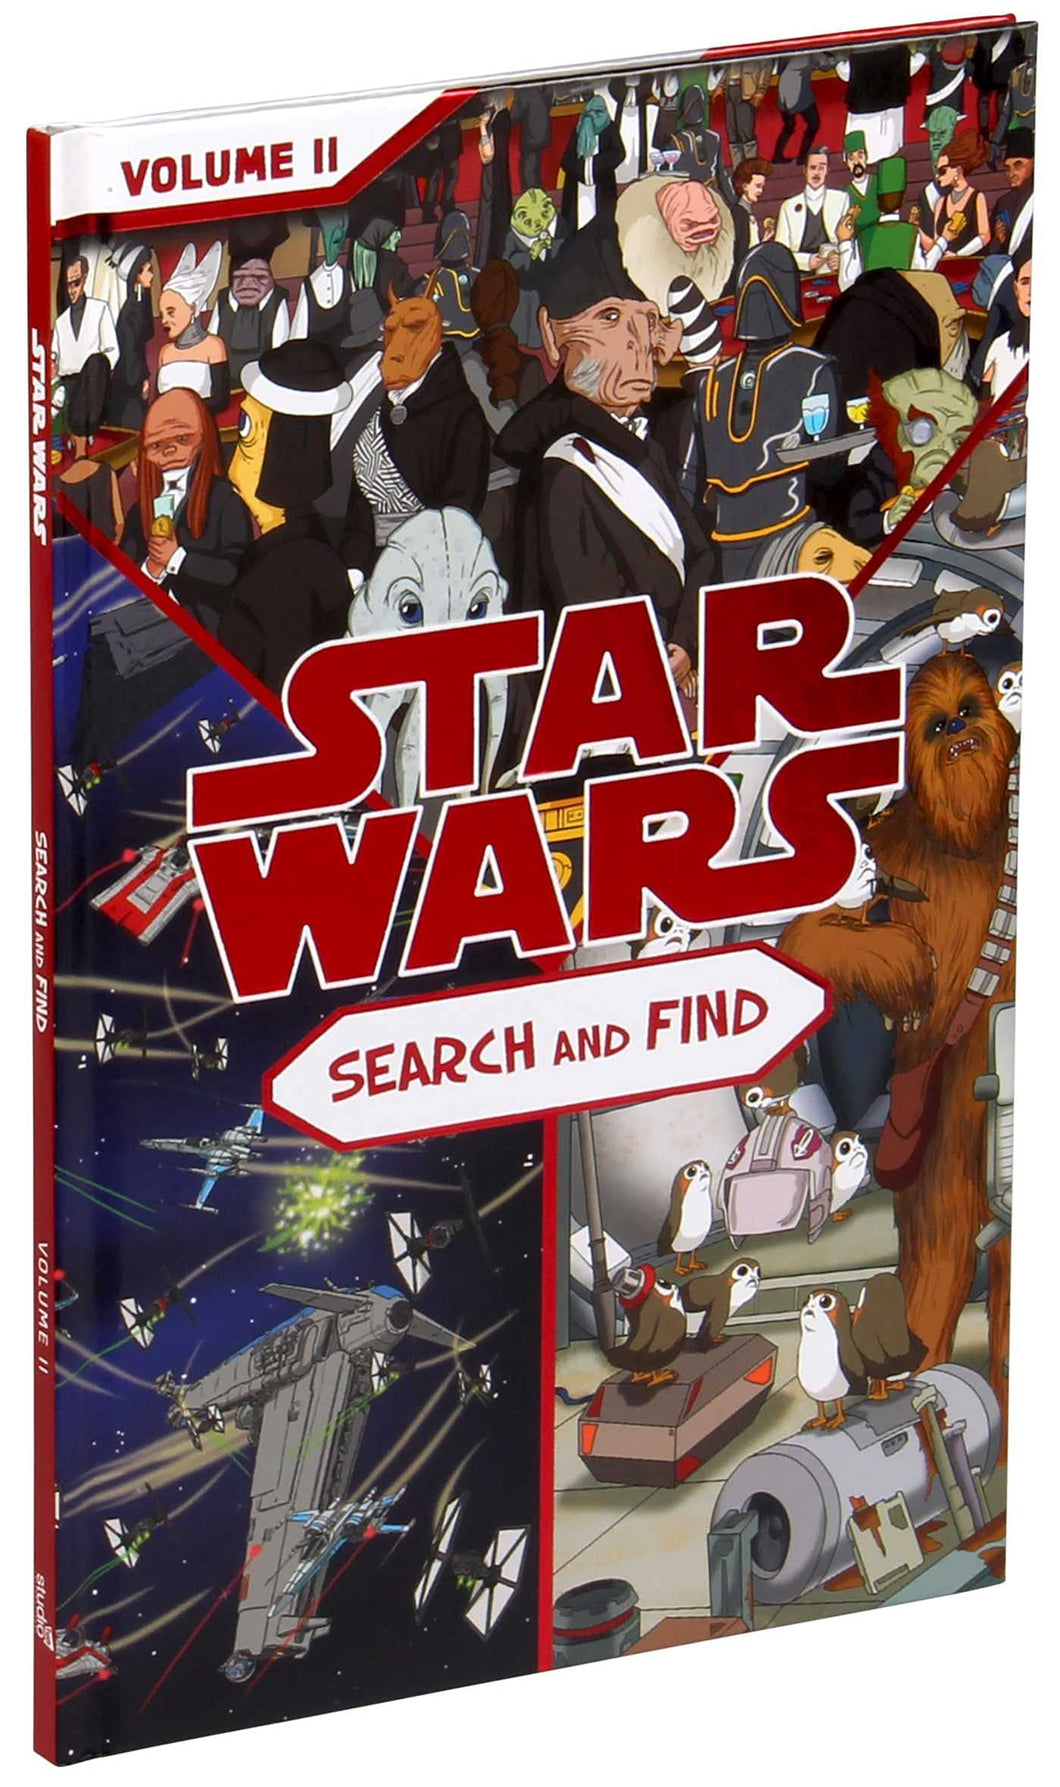 Star Wars: Search and Find Vol. II